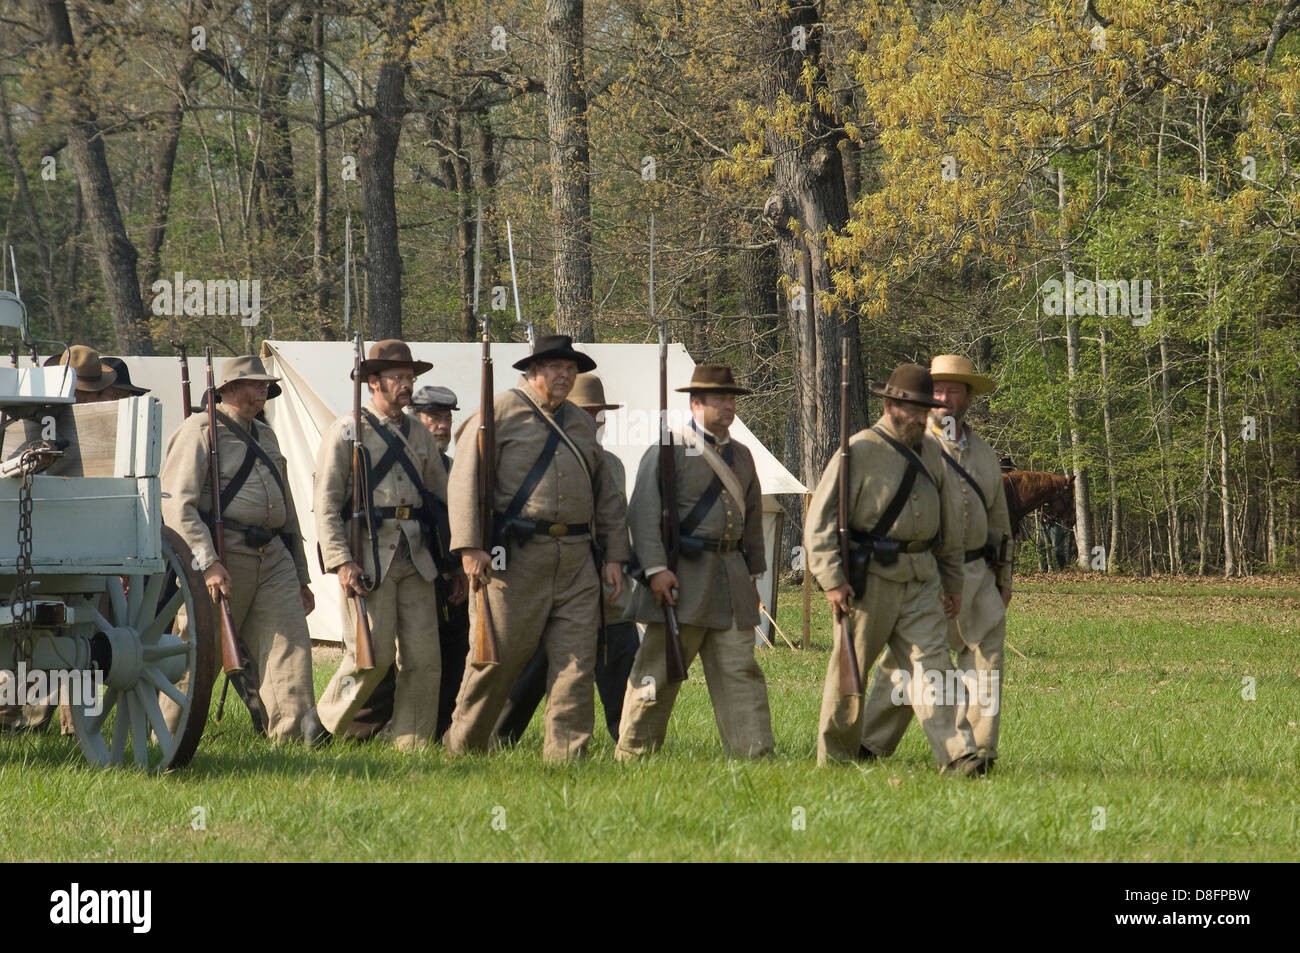 Confederate reenactors marching from camp, Shiloh National Military Park, Tennessee. Digital photograph Stock Photo